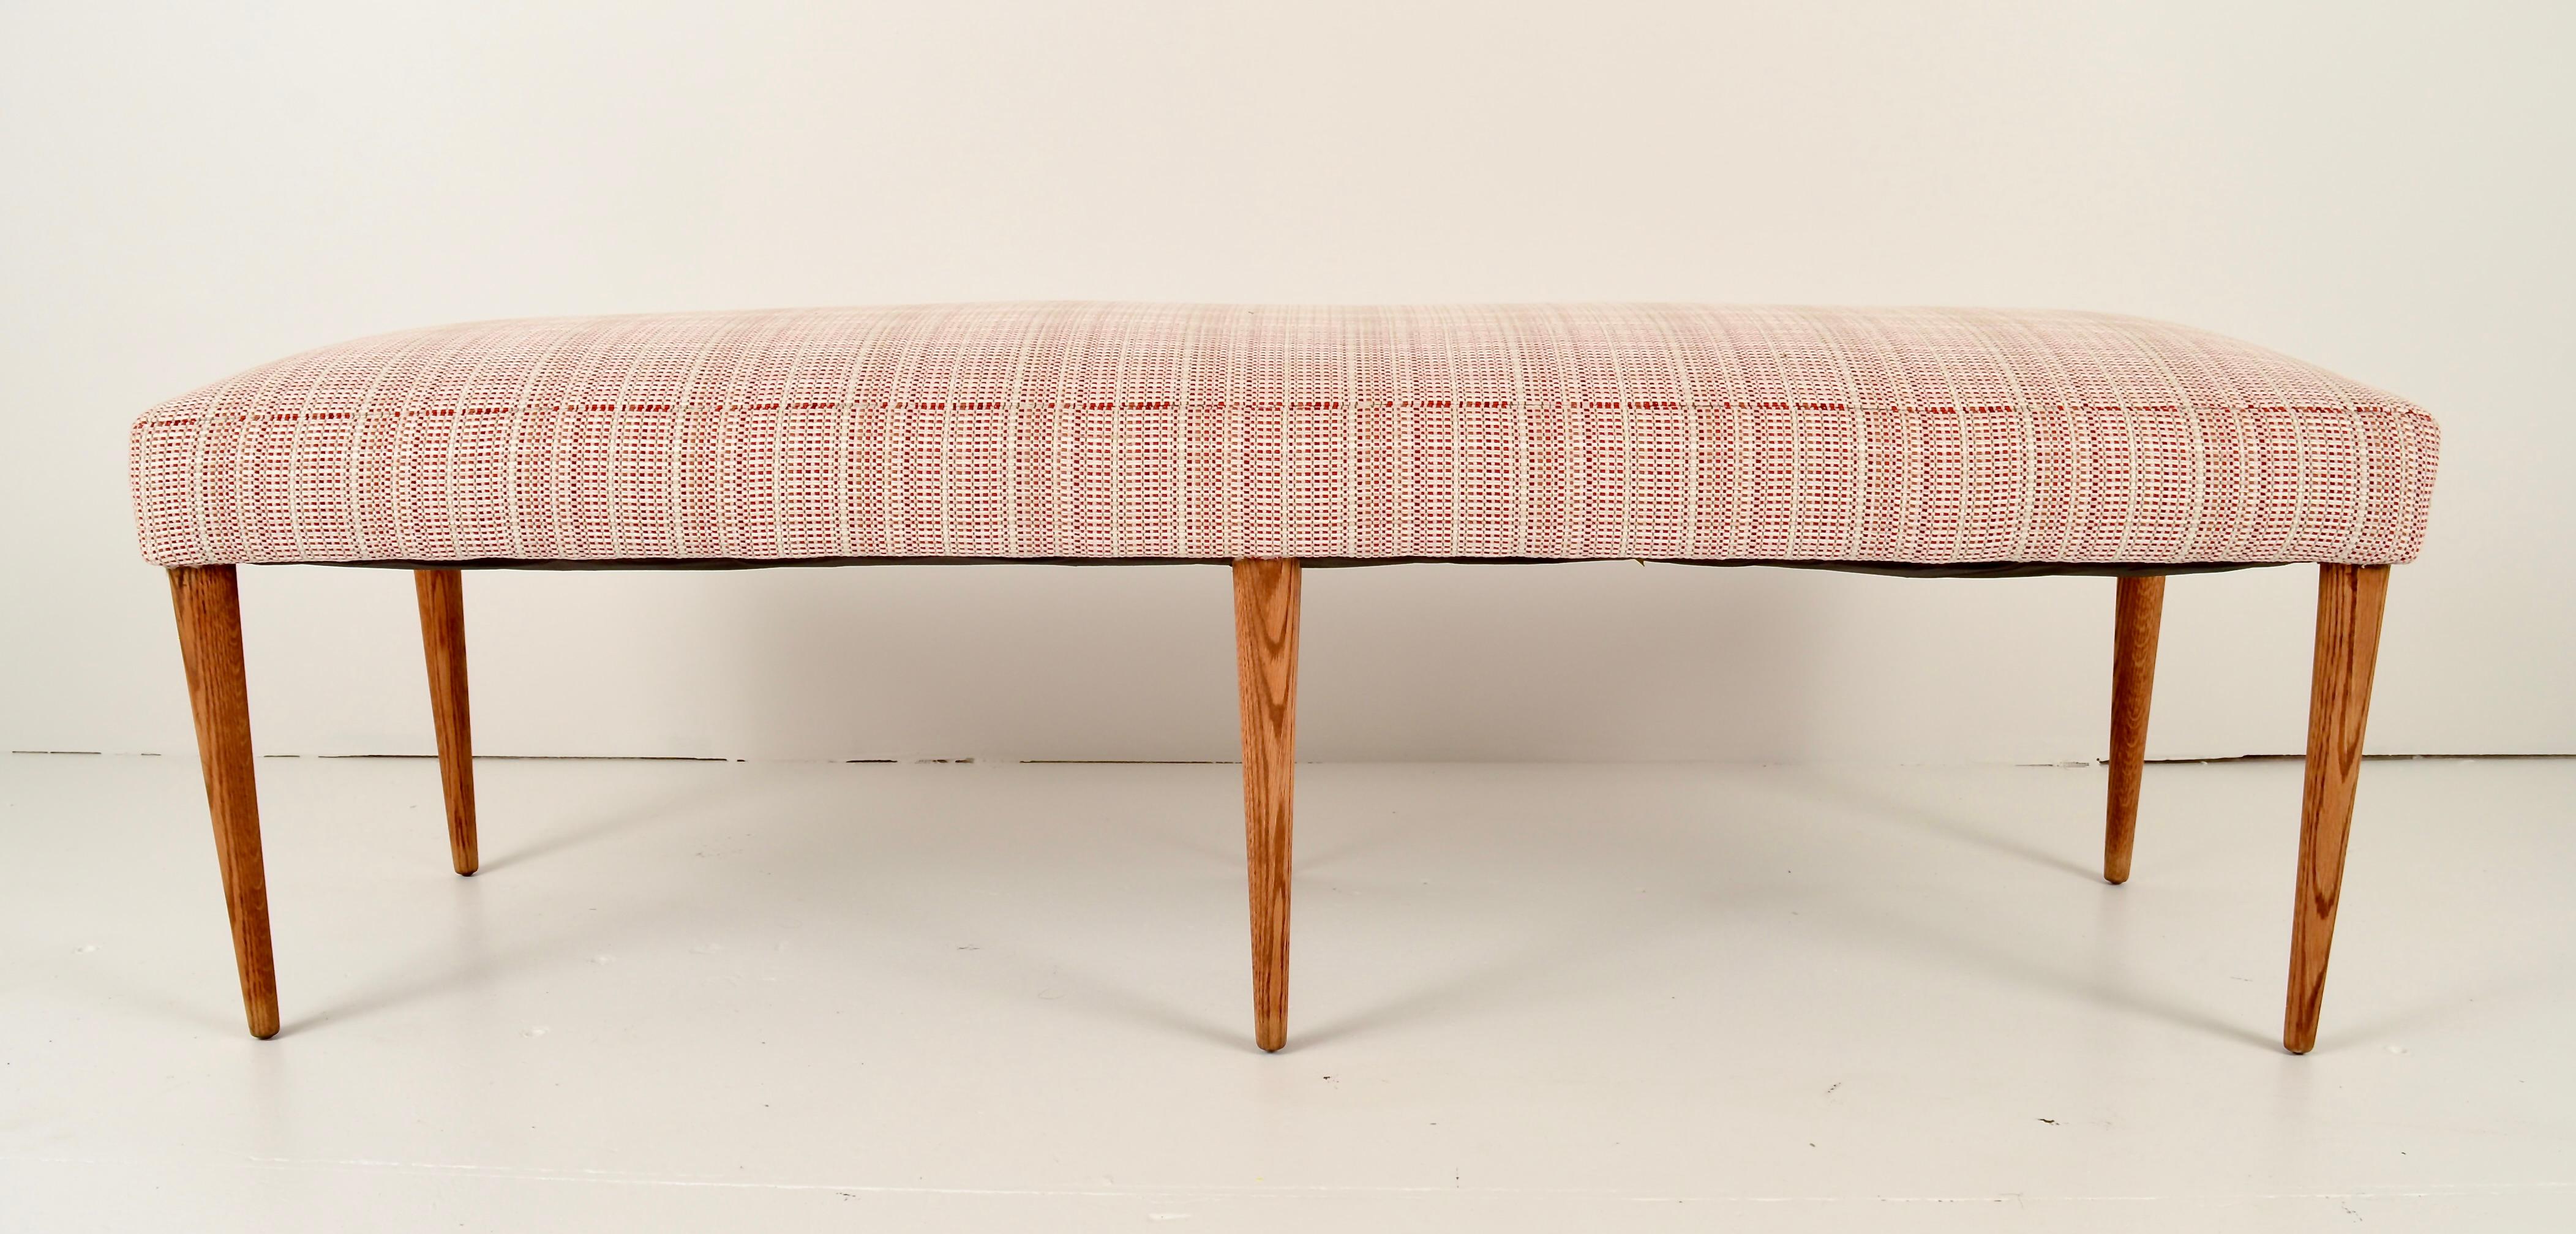 North American Modern Upholstered Bench, c 1960s For Sale